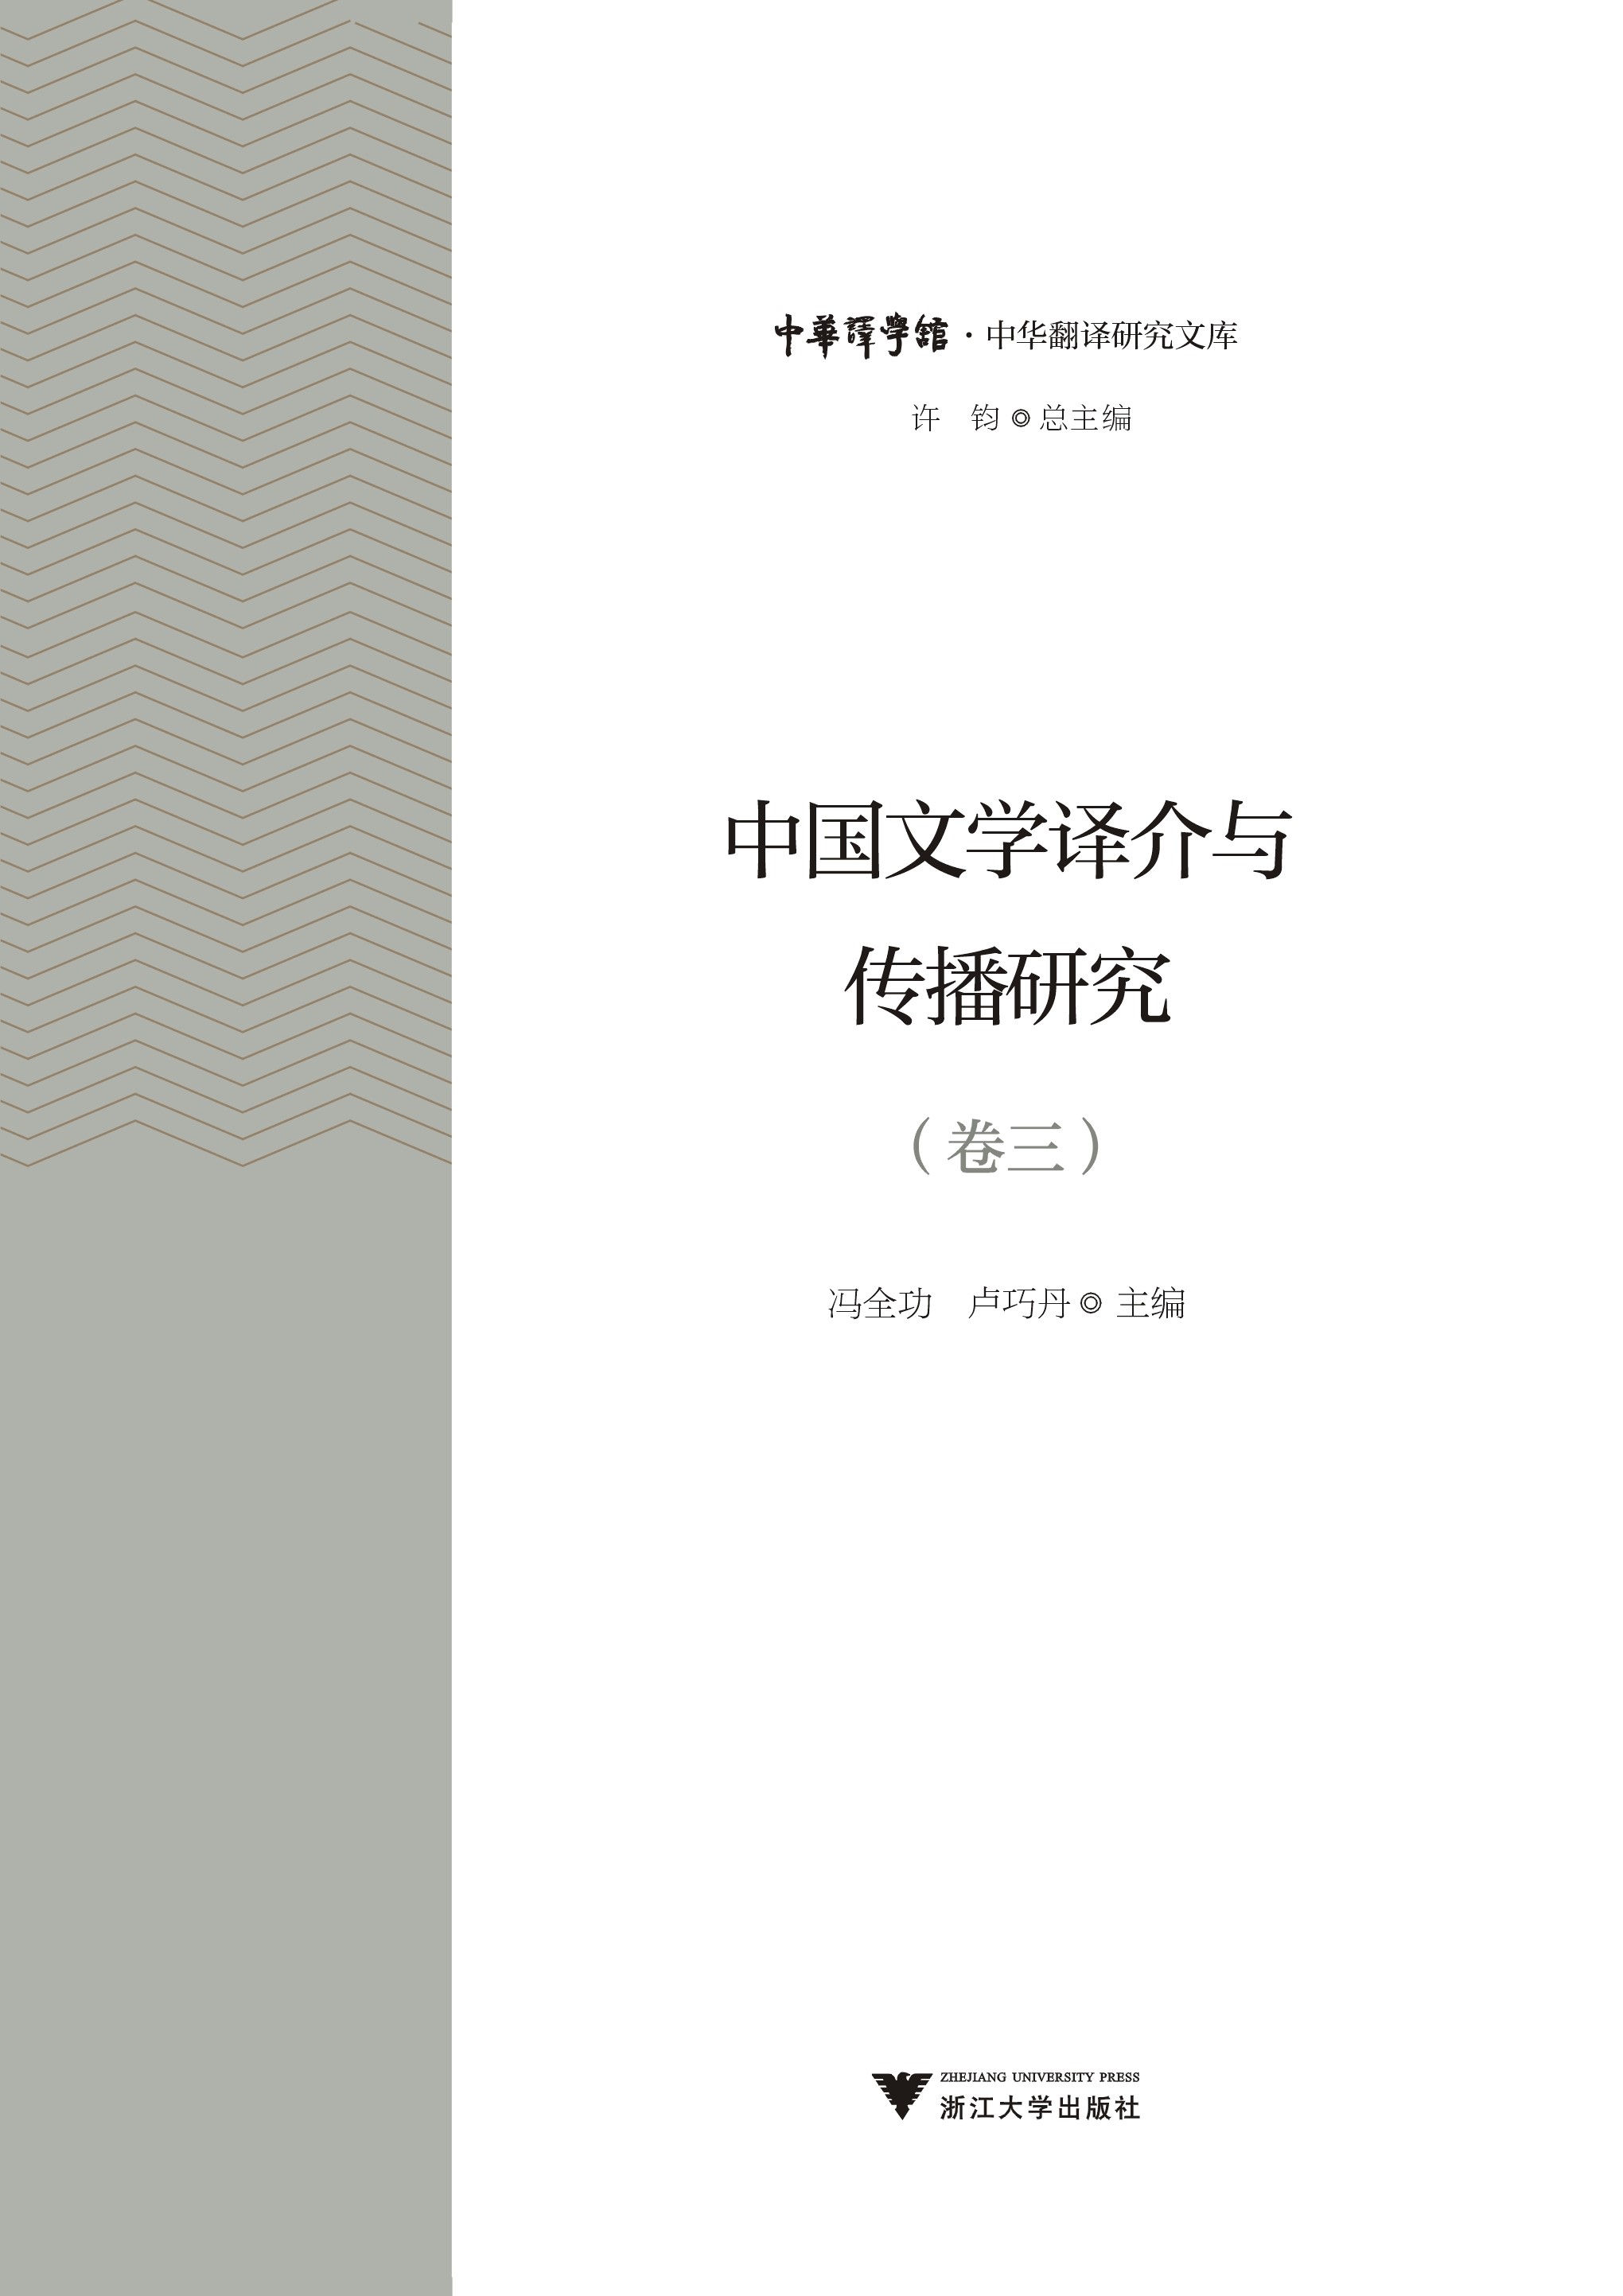 Translation and Promotion of Chinese Literature (Volume III)